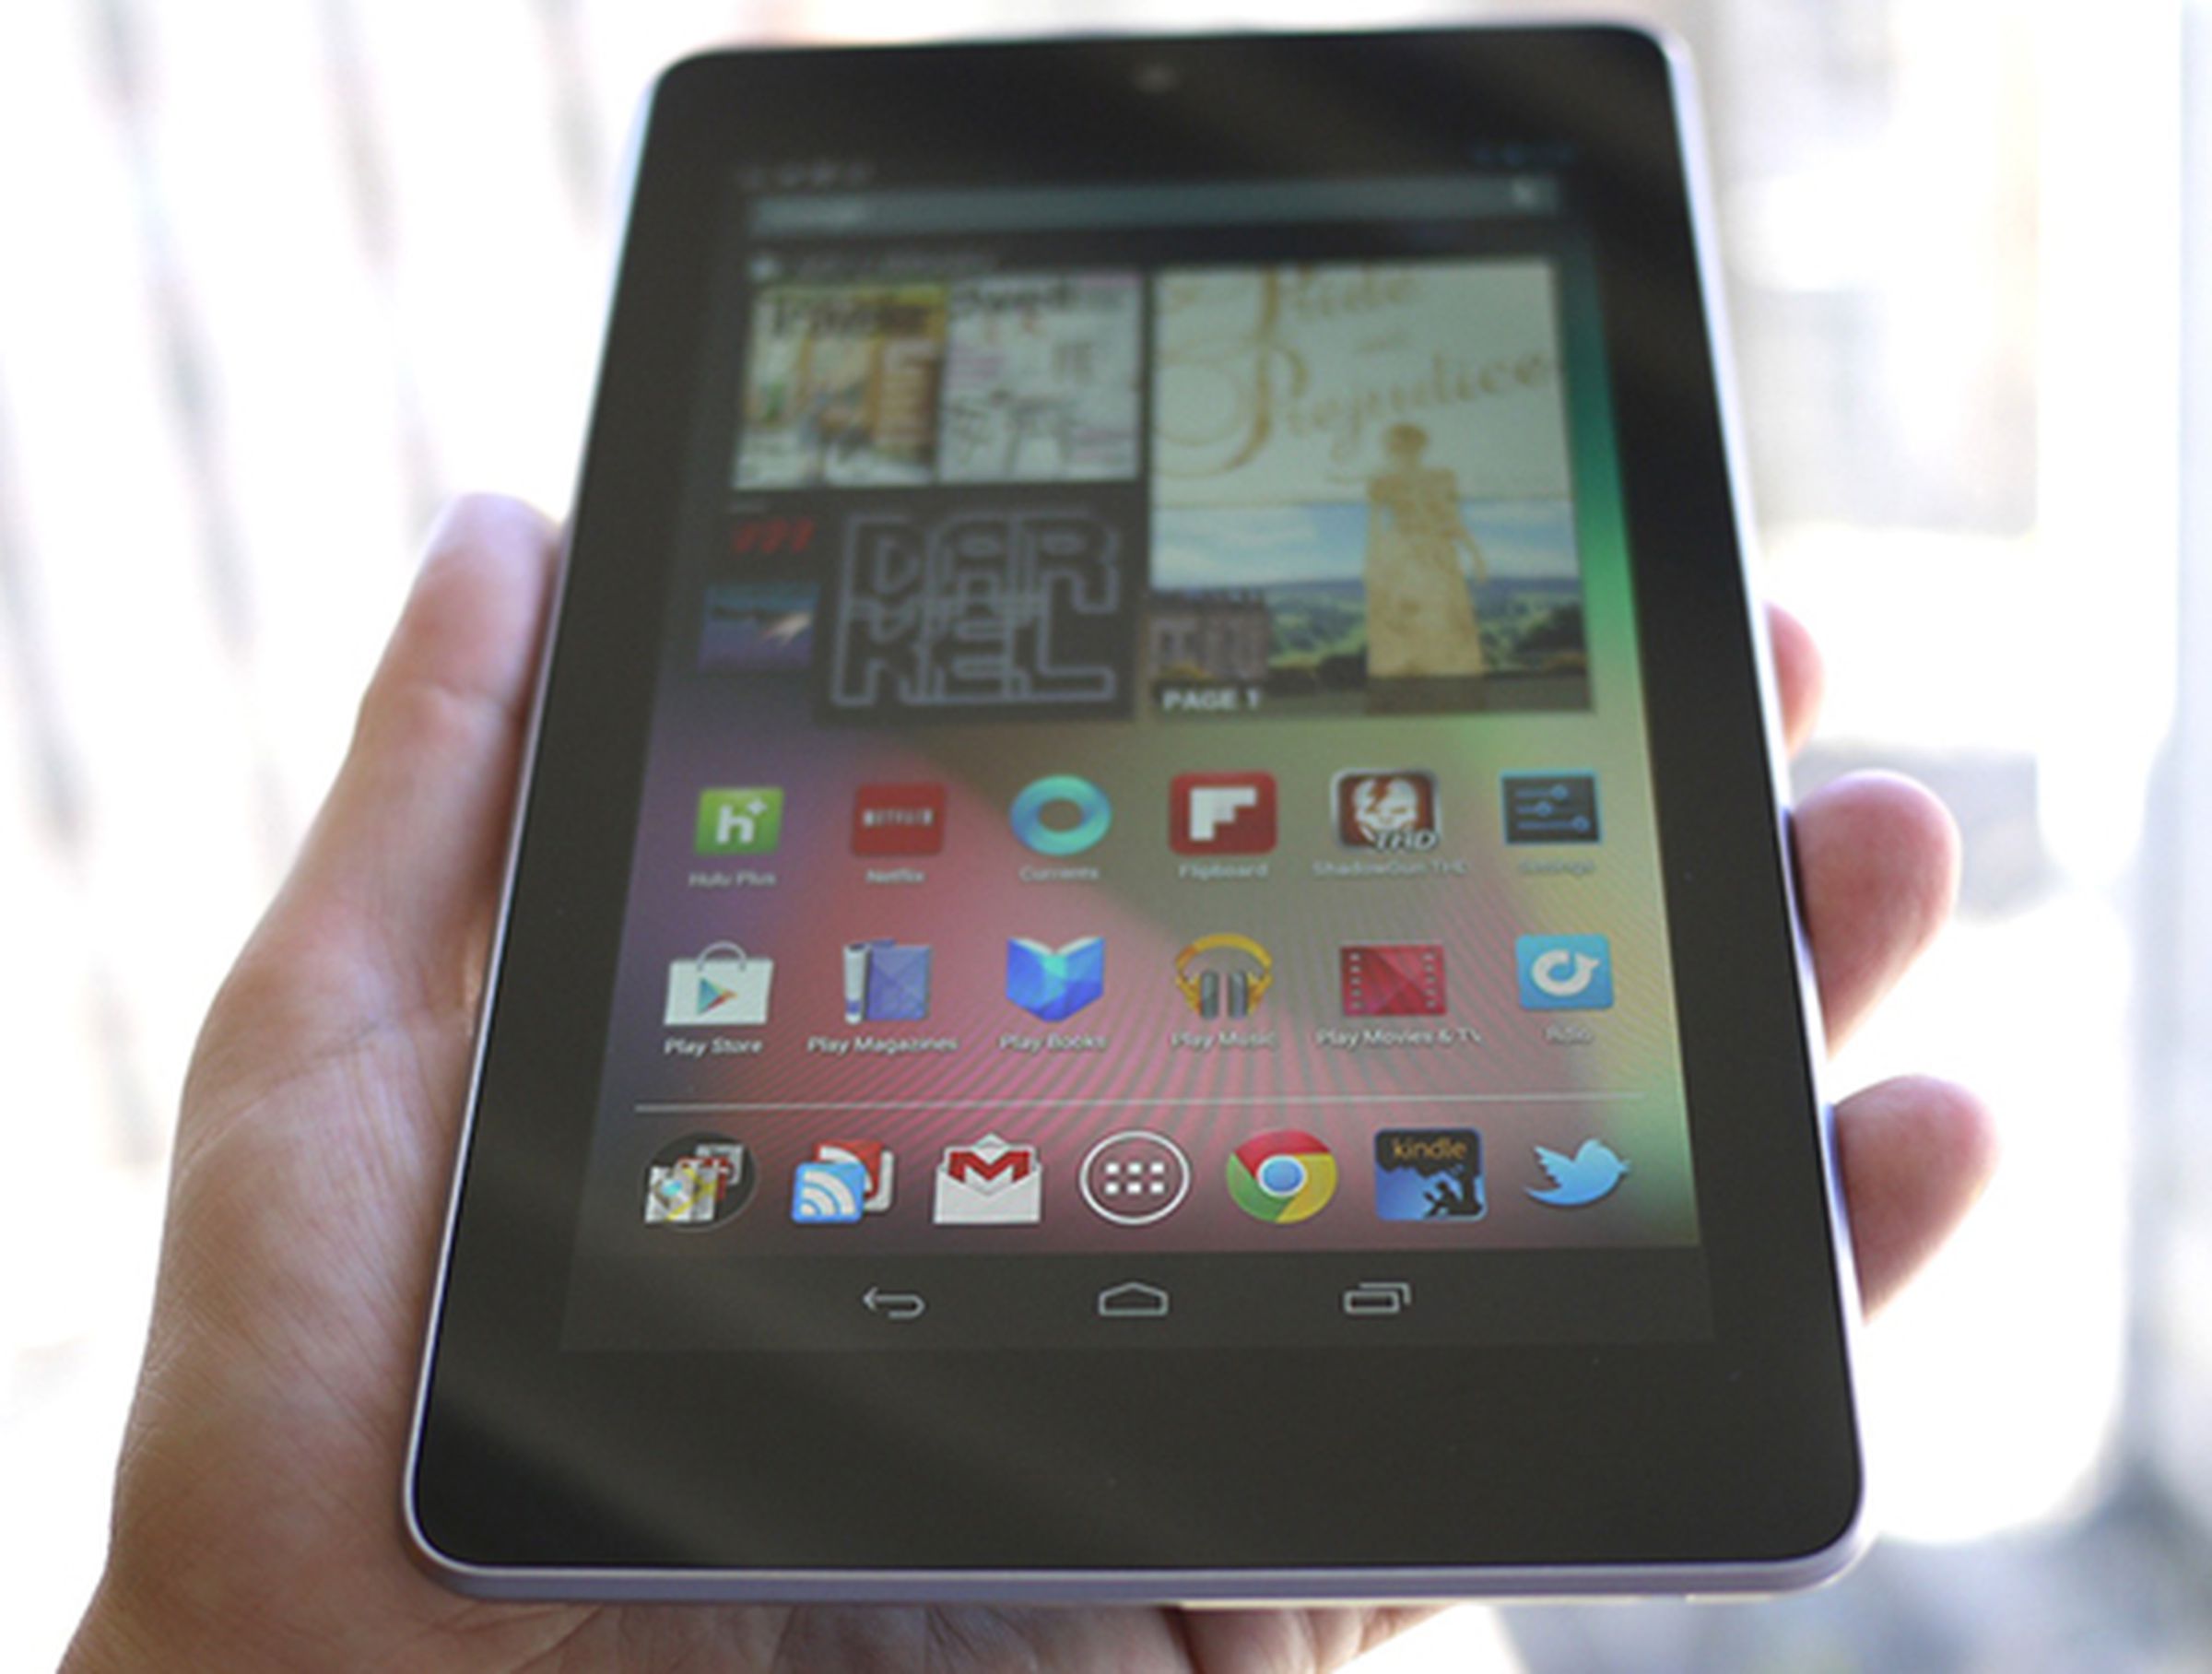 The 2012 Nexus 7, powered by Android